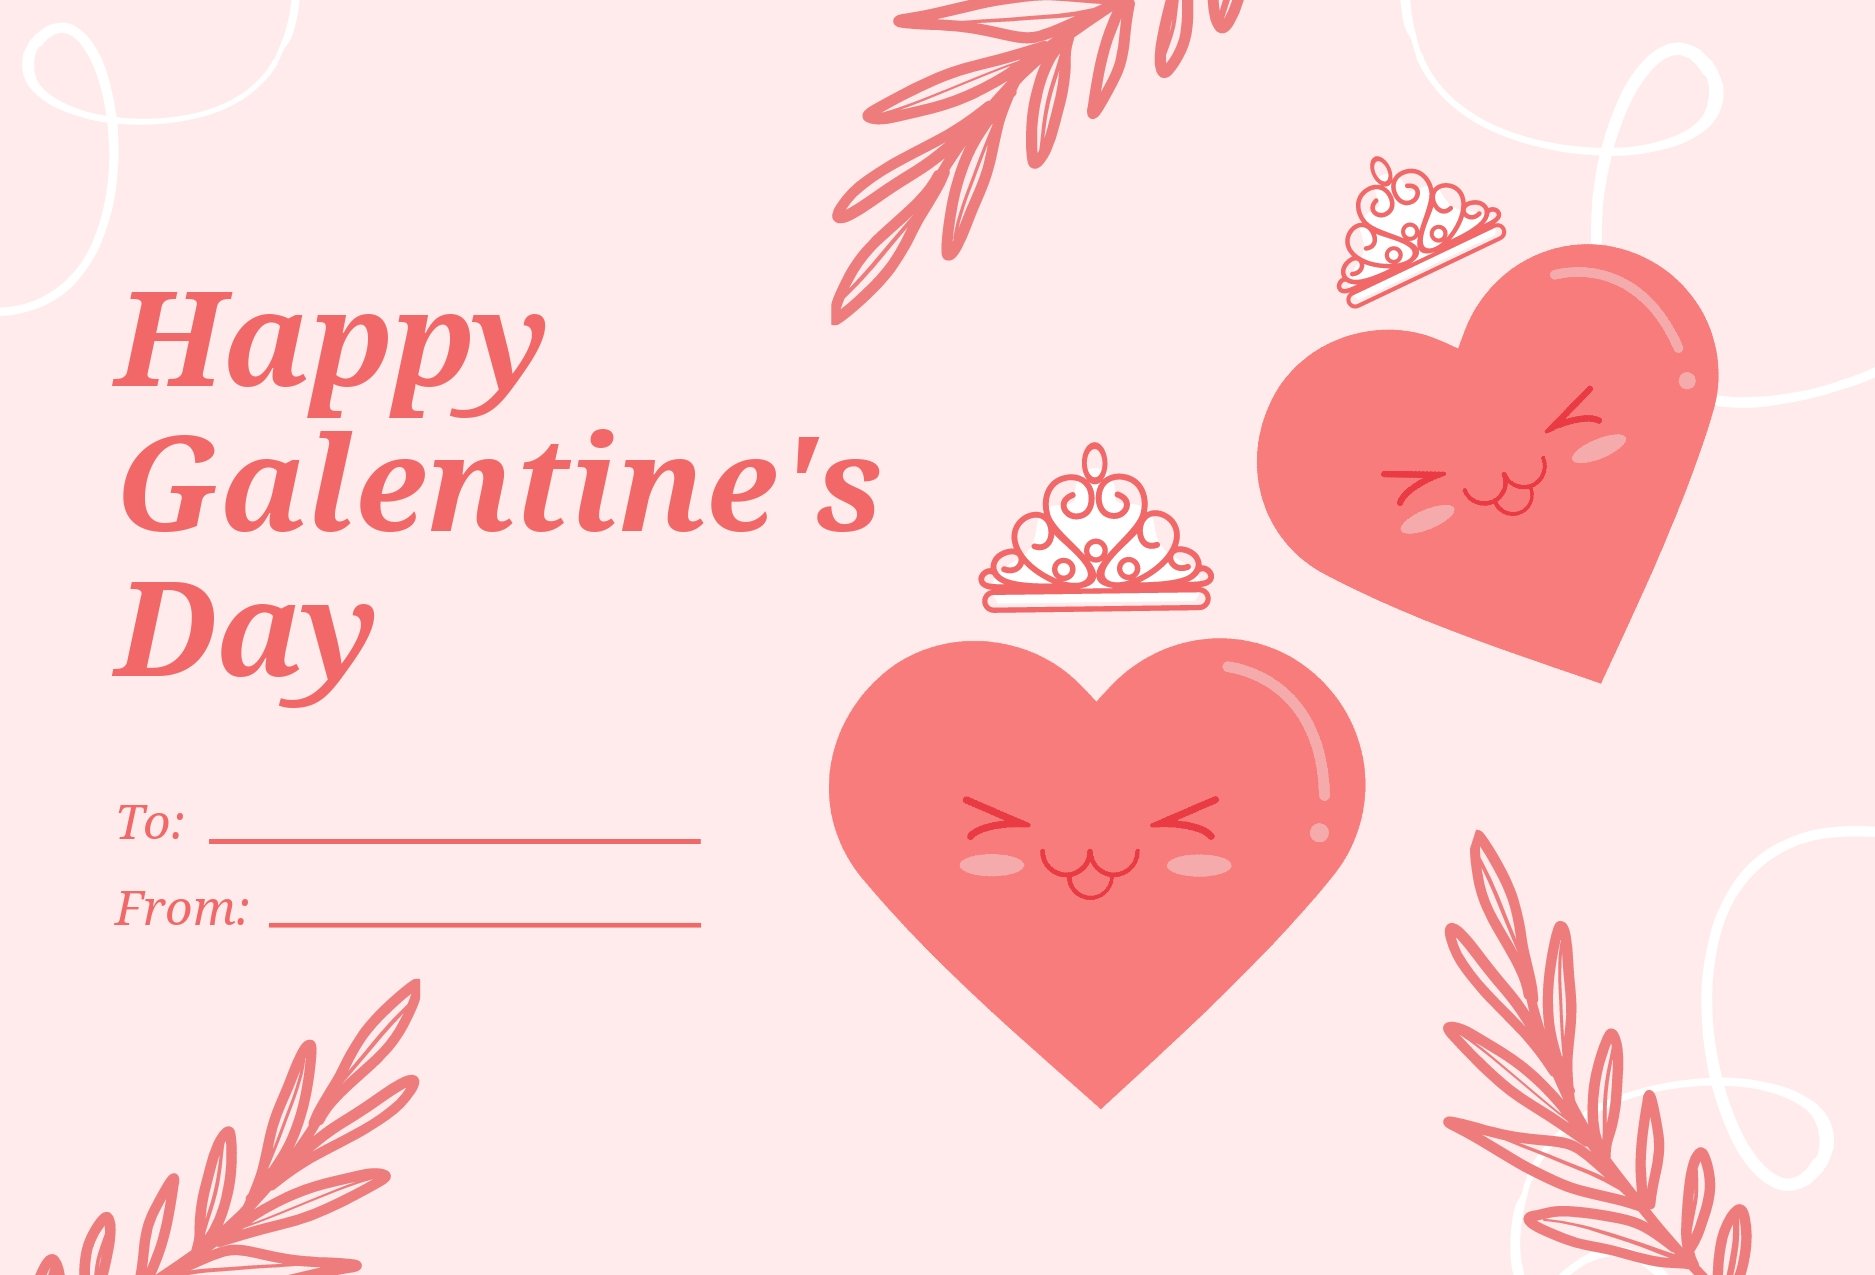 Free Funny Galentine's Day Card Template